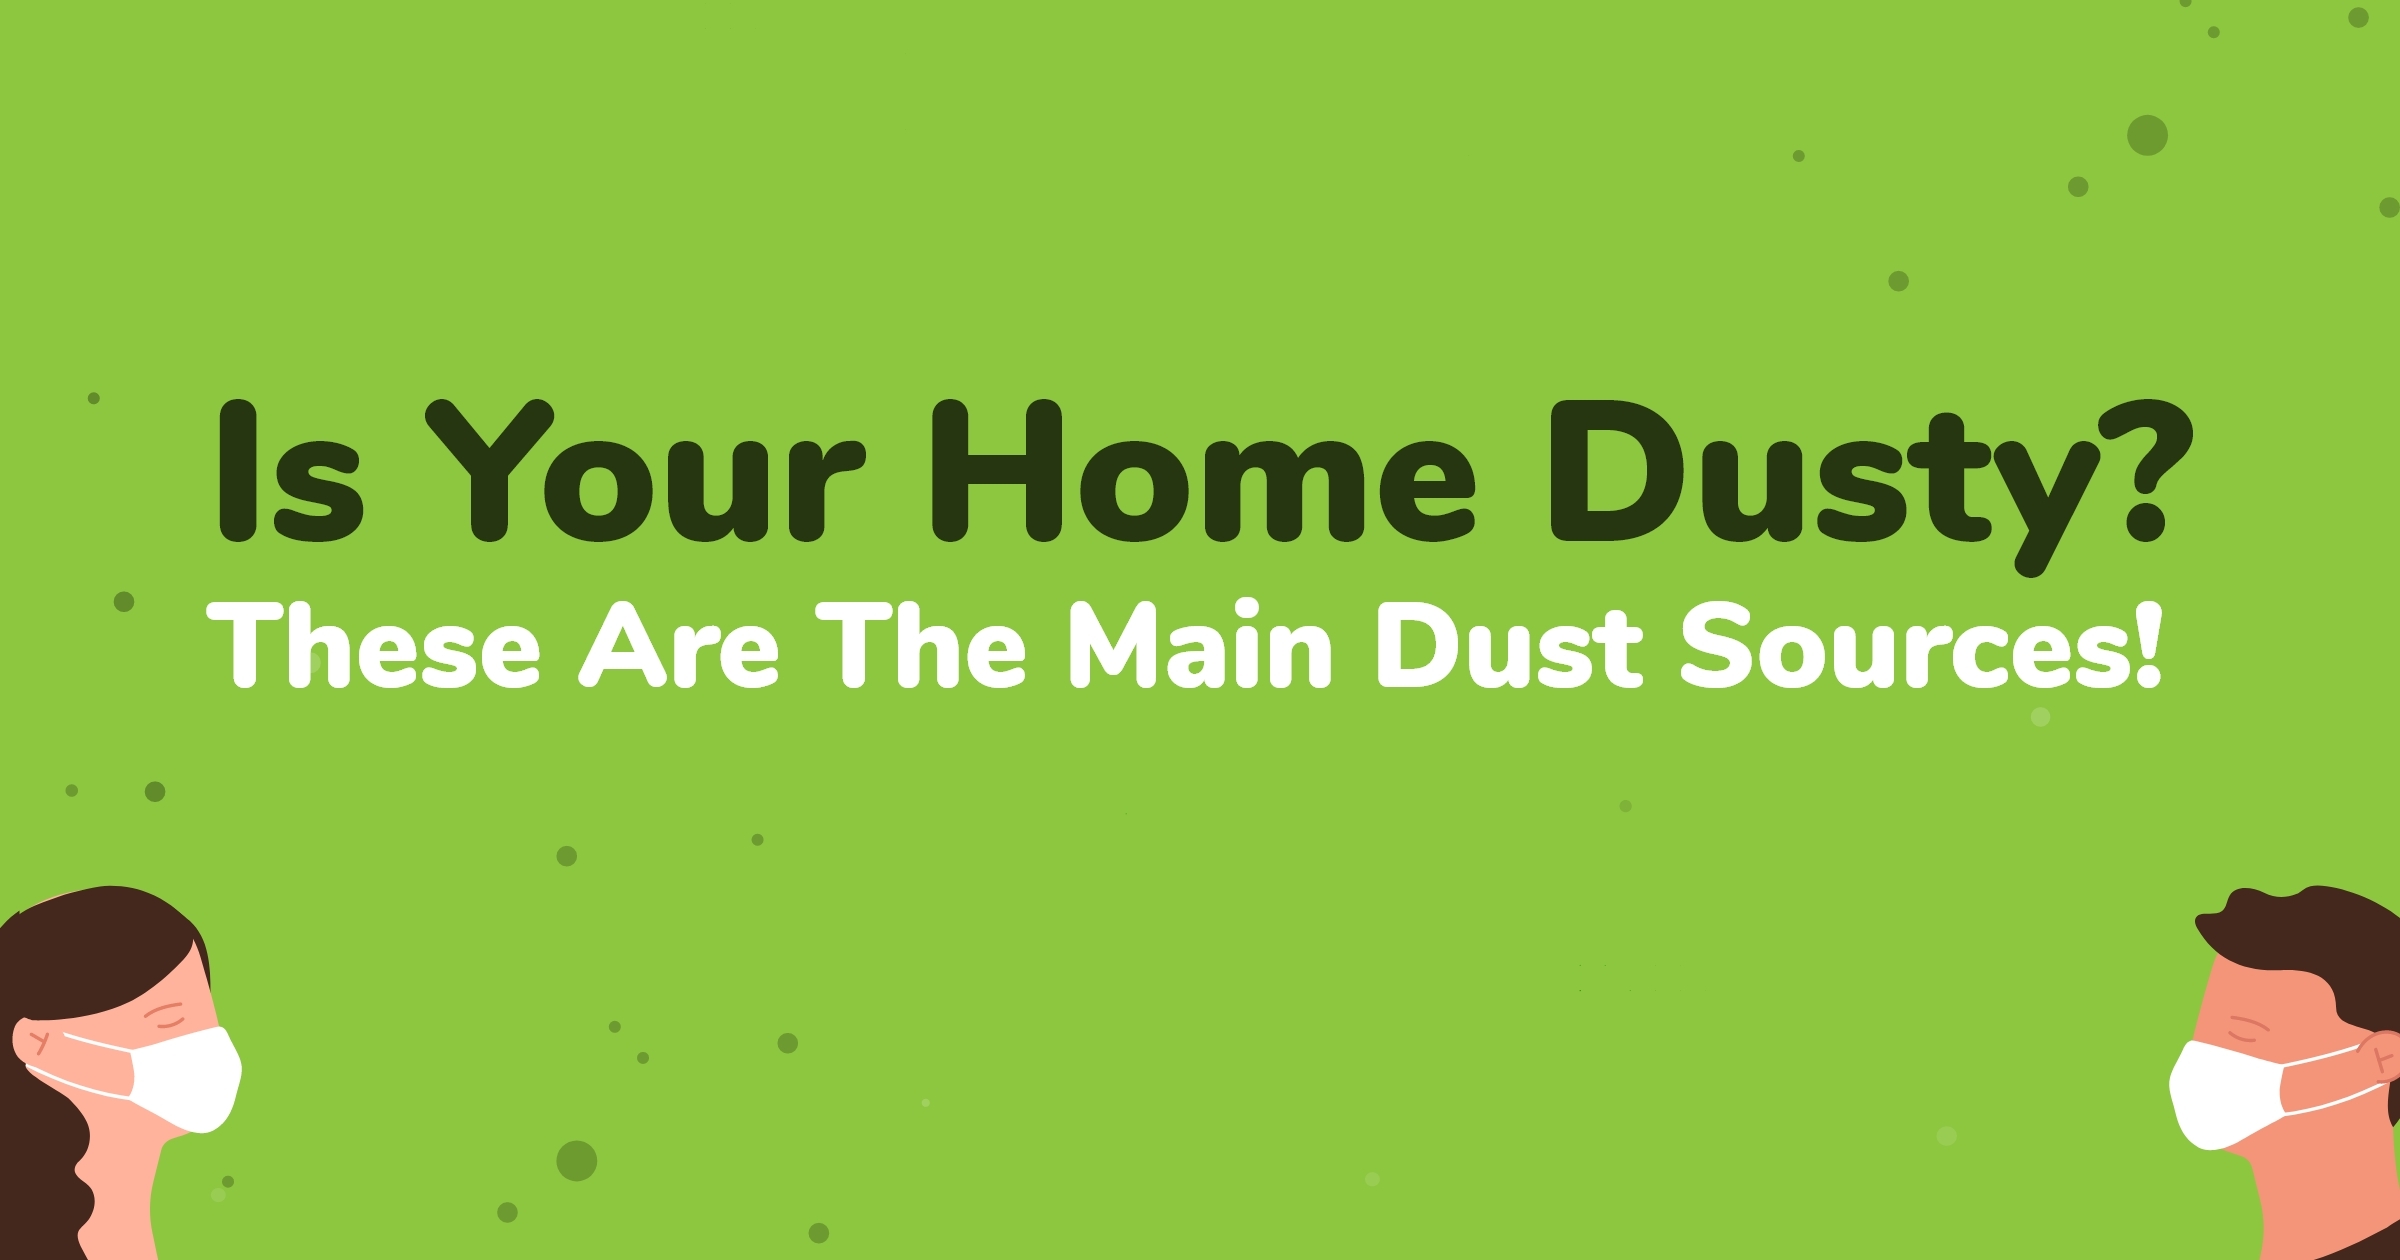 Is Your Home Dusty? These Are The Main Dust Sources!